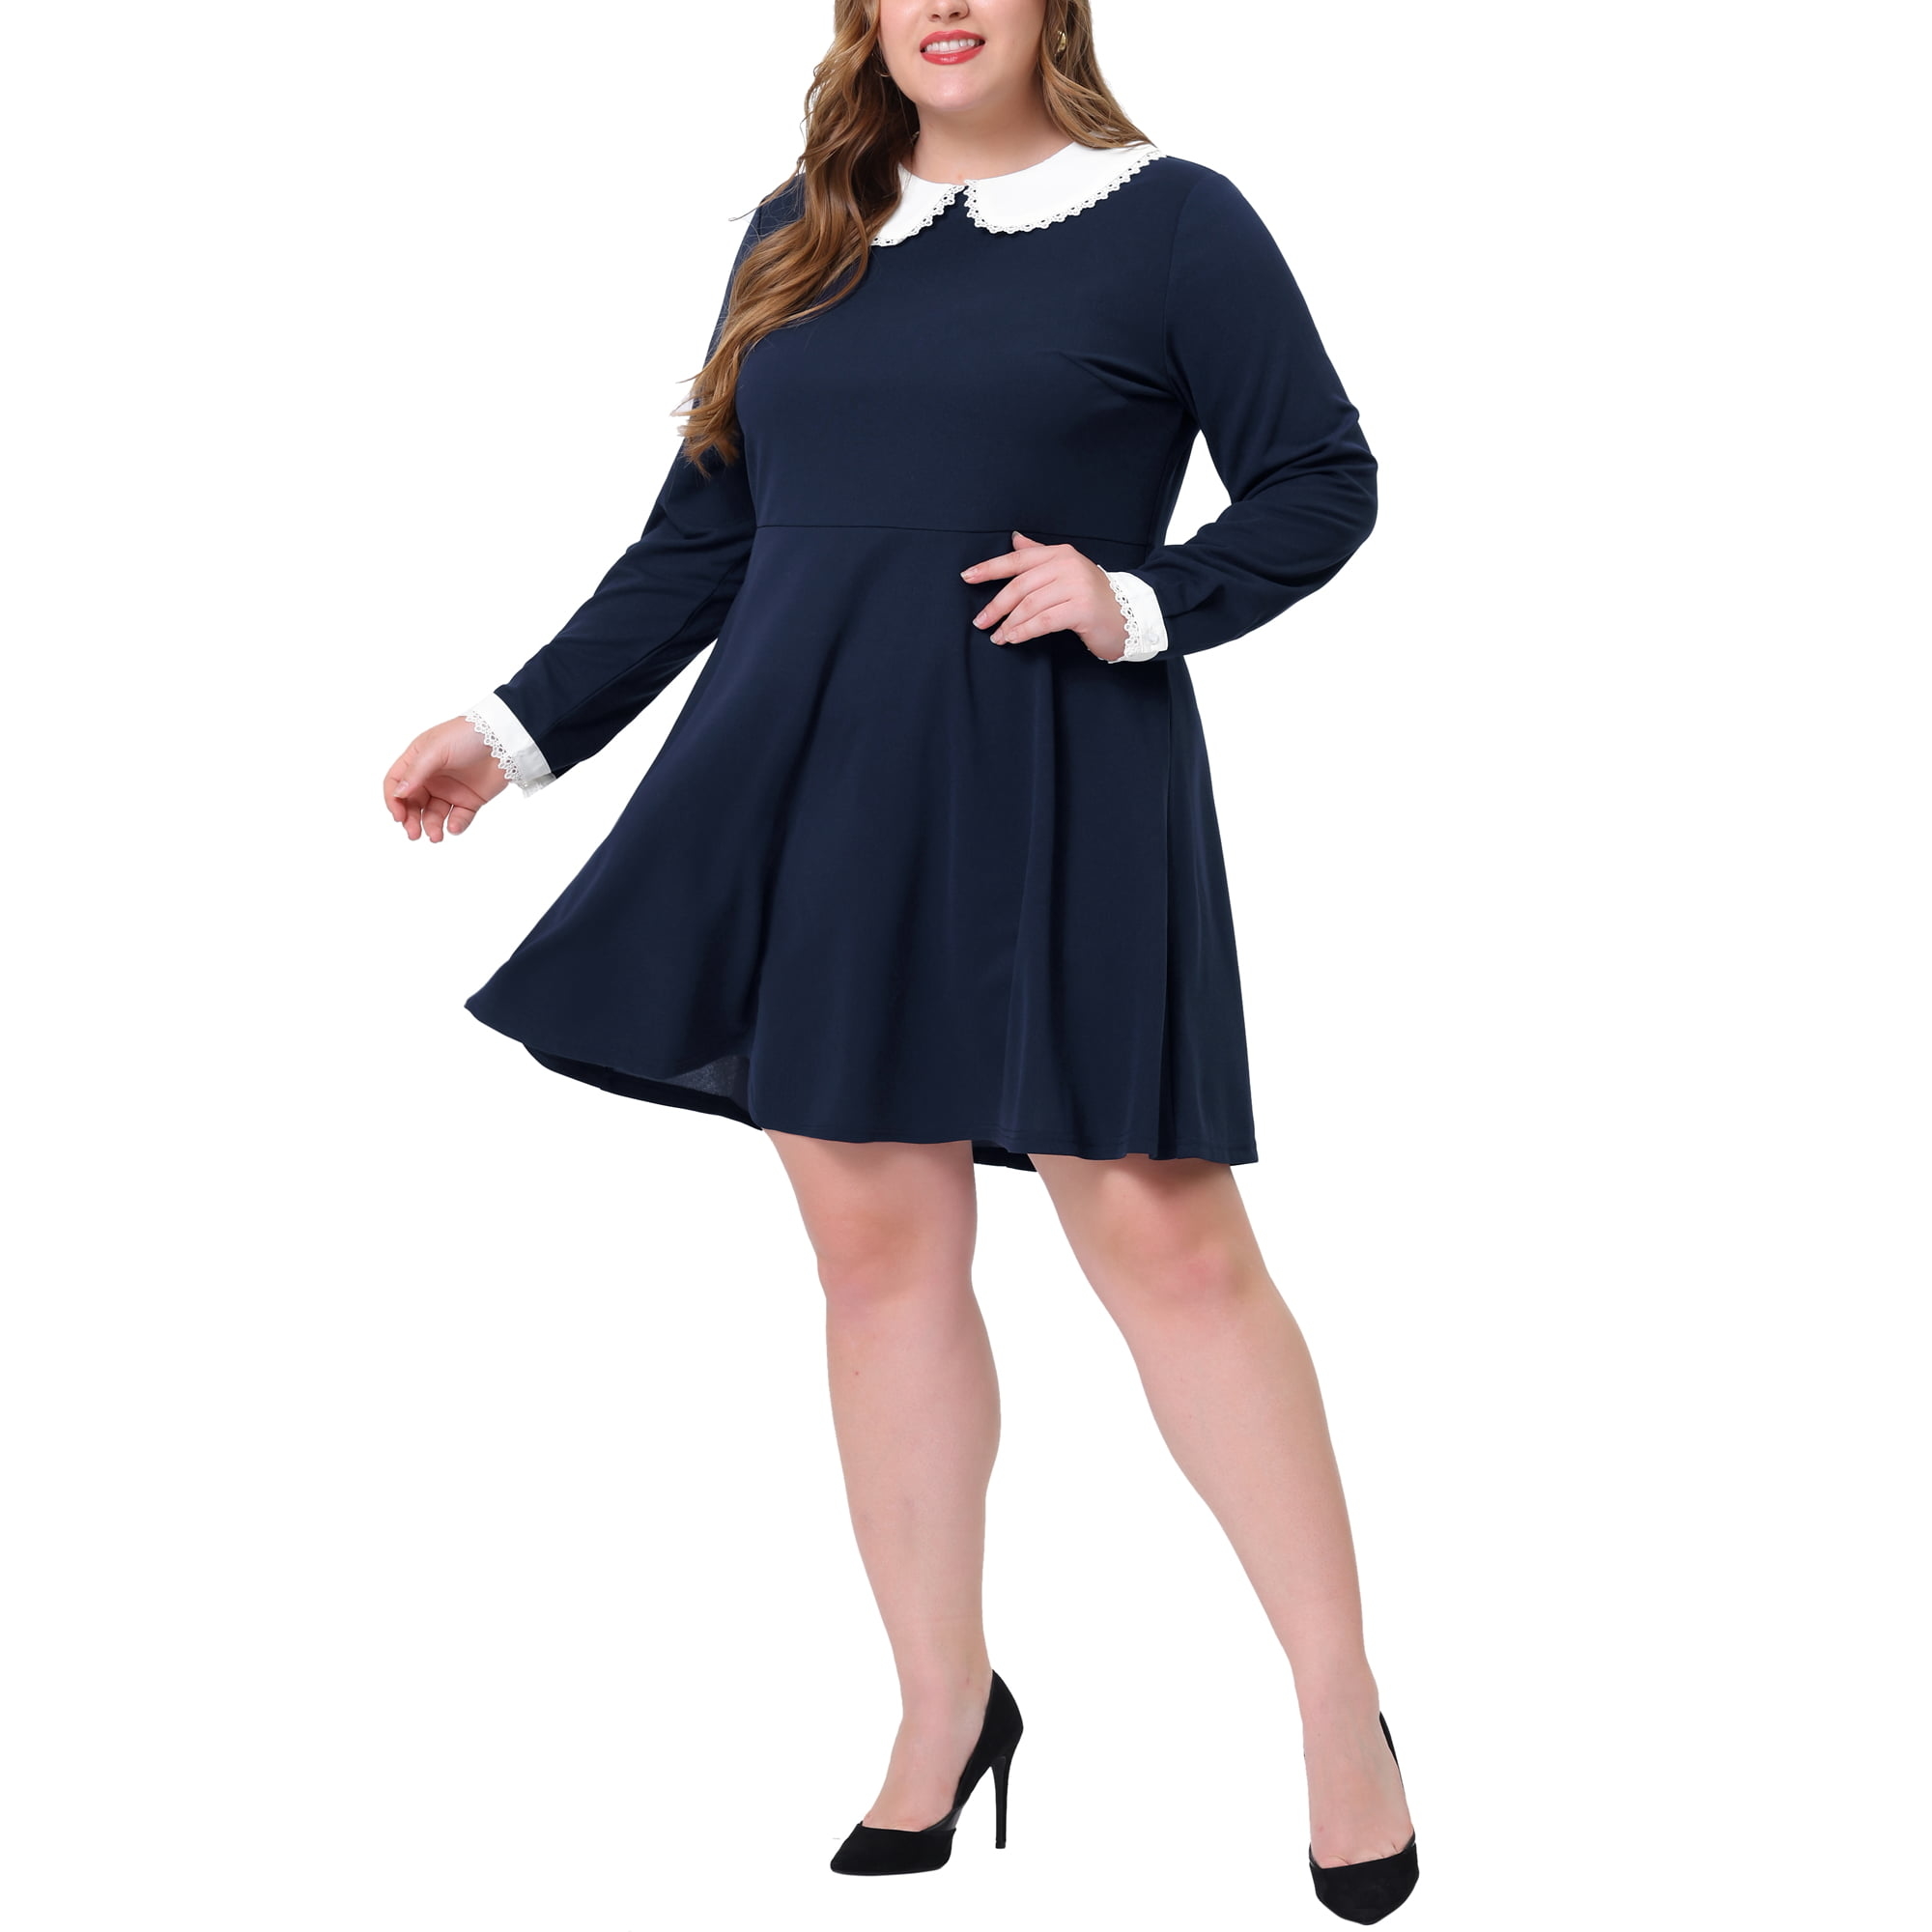 the dress in navy with long sleeves and a white collar